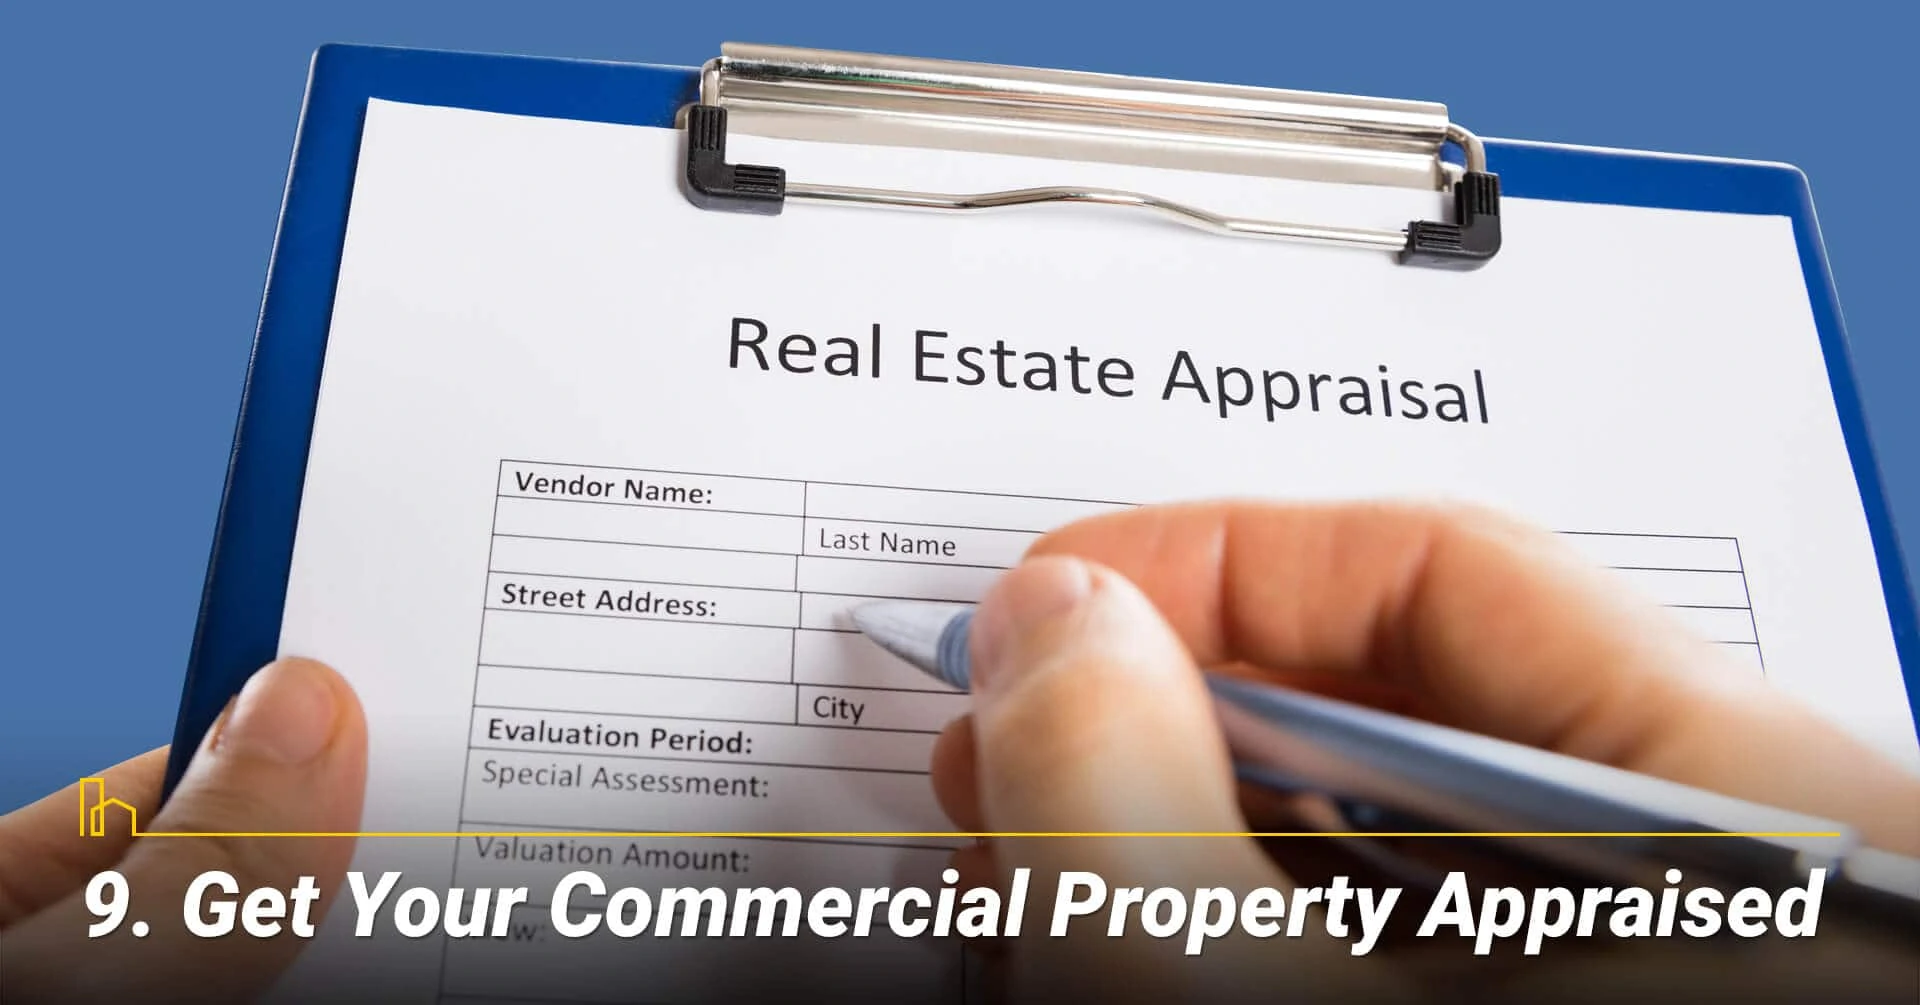 Get Your Commercial Property Appraised, appraise your commercial property